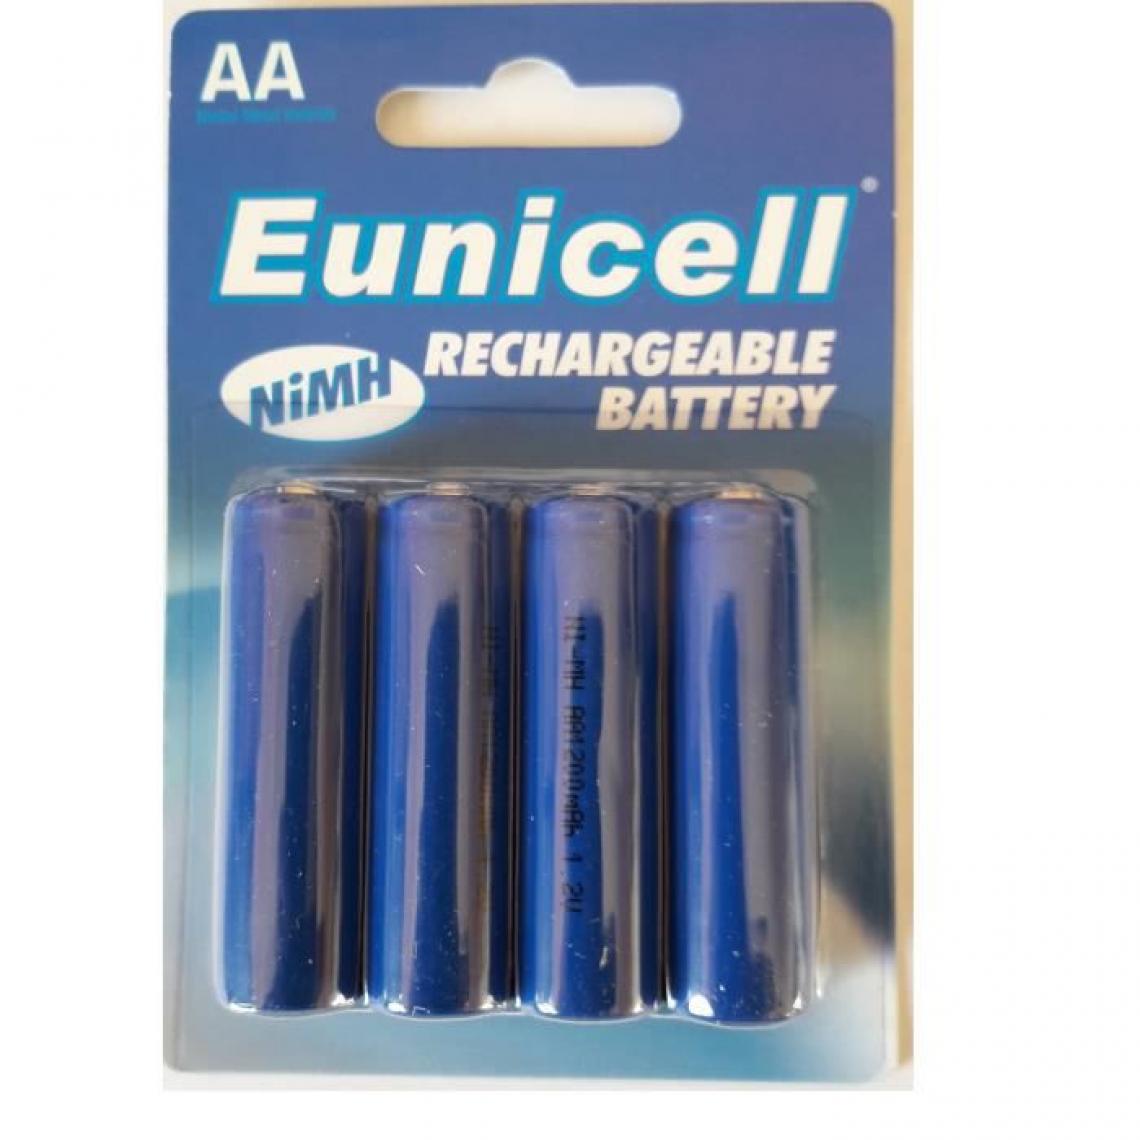 Eunicell - EUNICELL 4 piles rechargeables AA - LR06 - LR6 1,2 volt 1200 mAh - Piles rechargeables